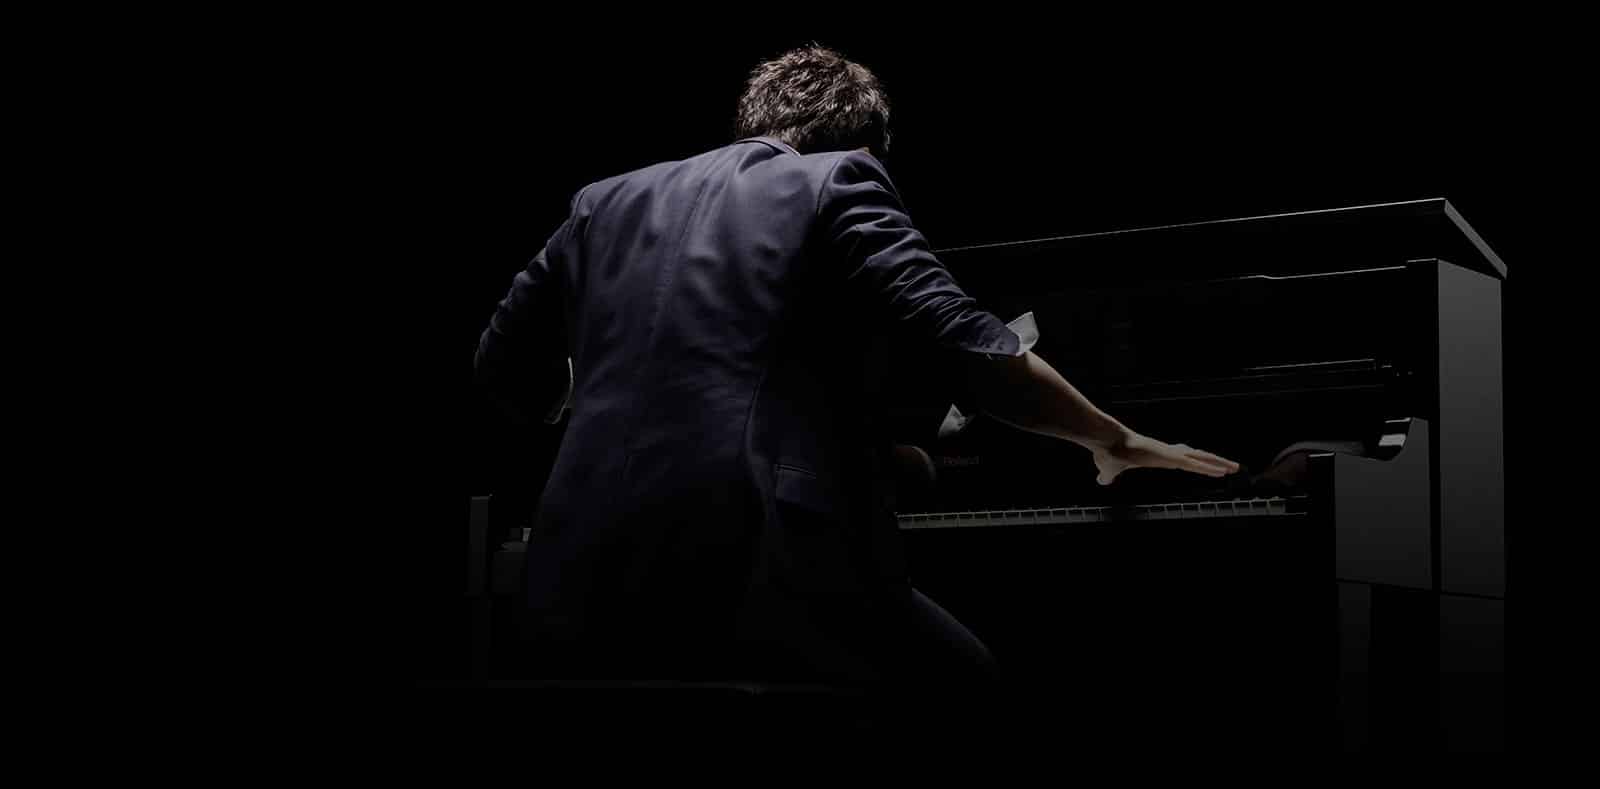 International pianist is questioned over porn pics